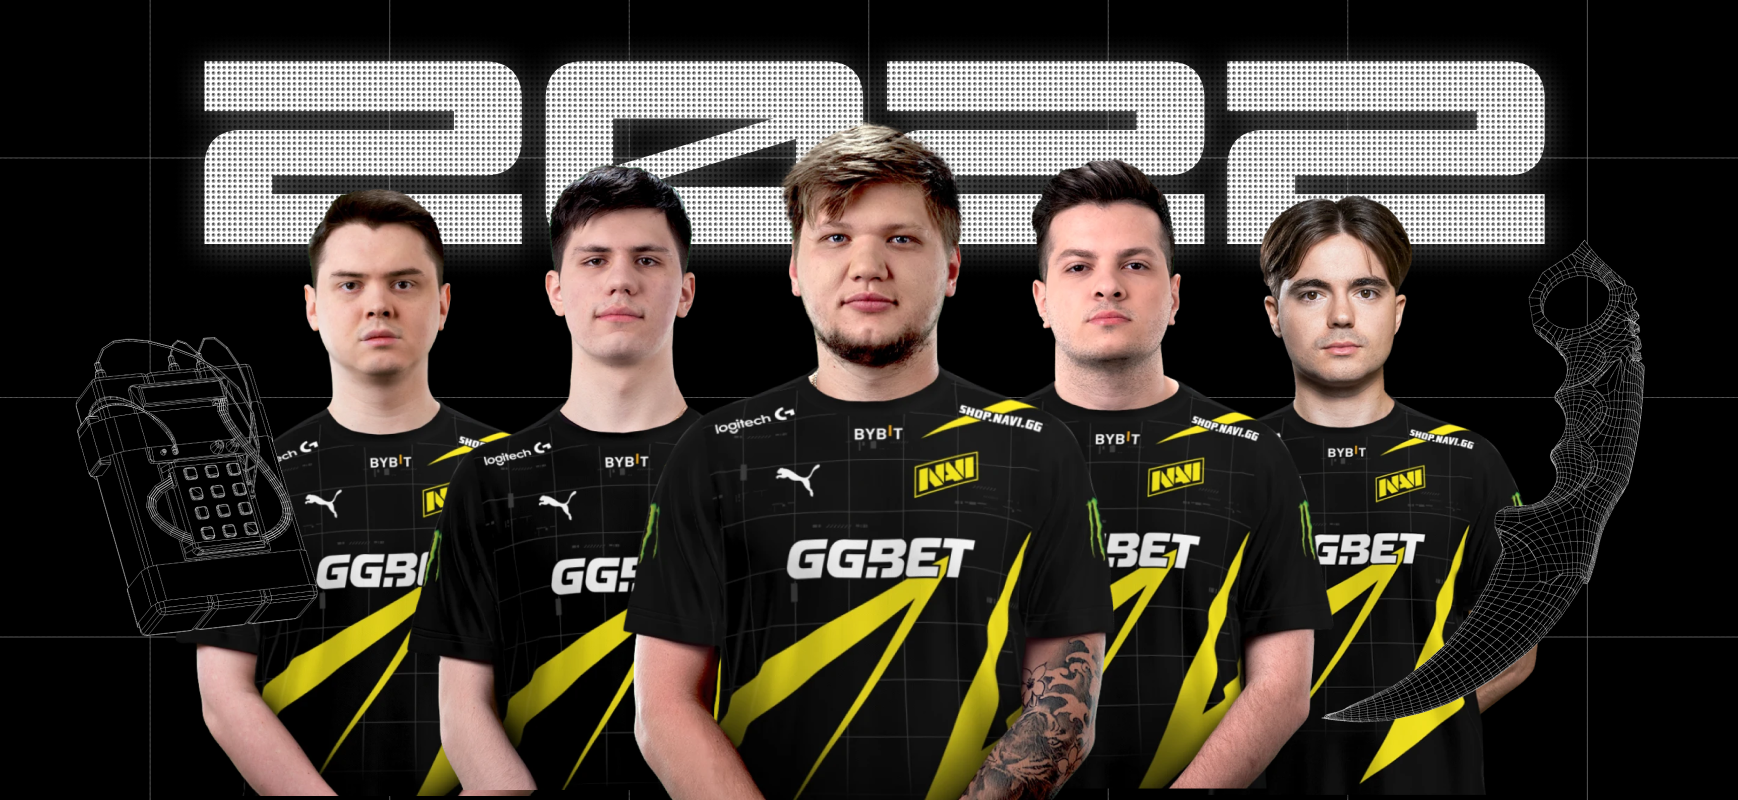 LiTTle: If S1mple Continues At The Same Level, NaVi Will Start Winning